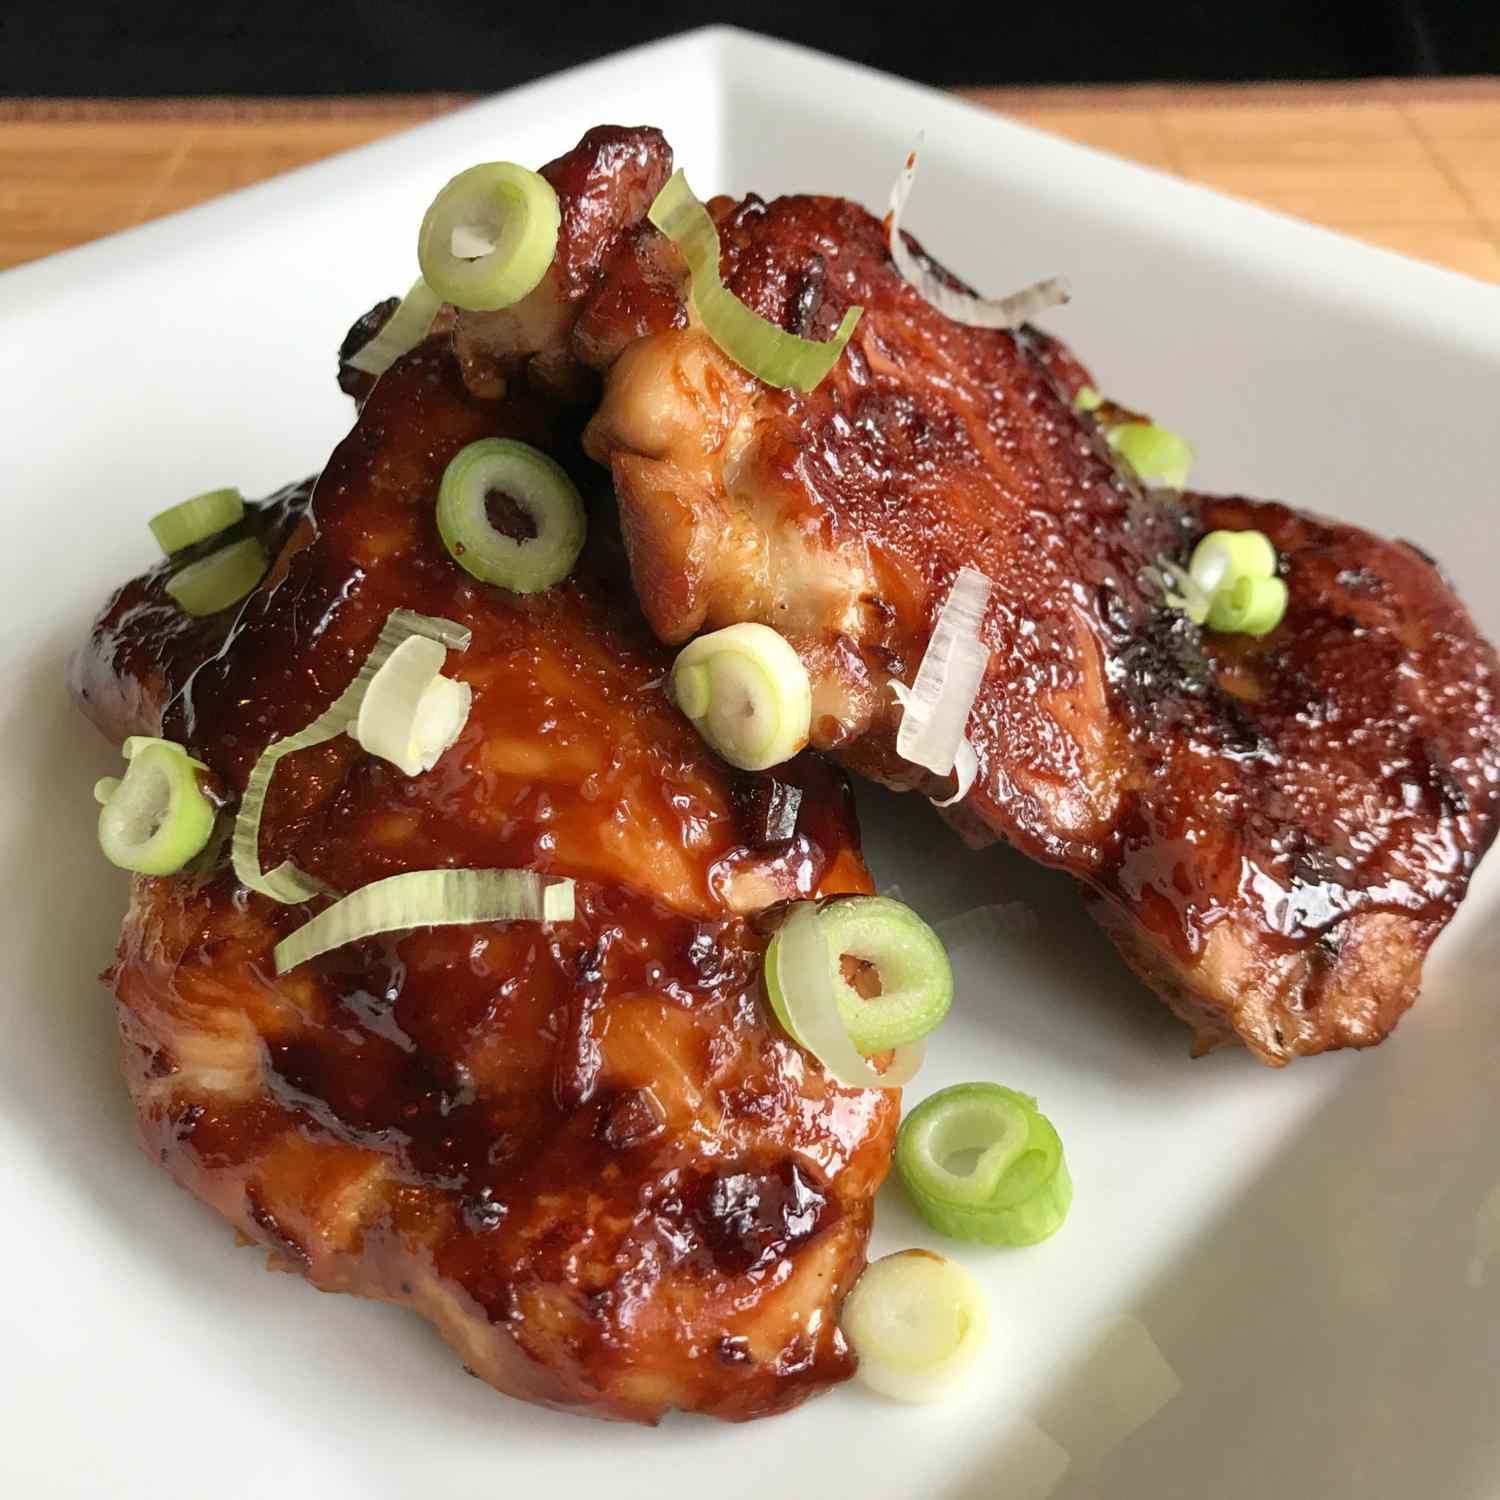 chicken thighs baked with teriyaki sauce and garnished with sliced scallions